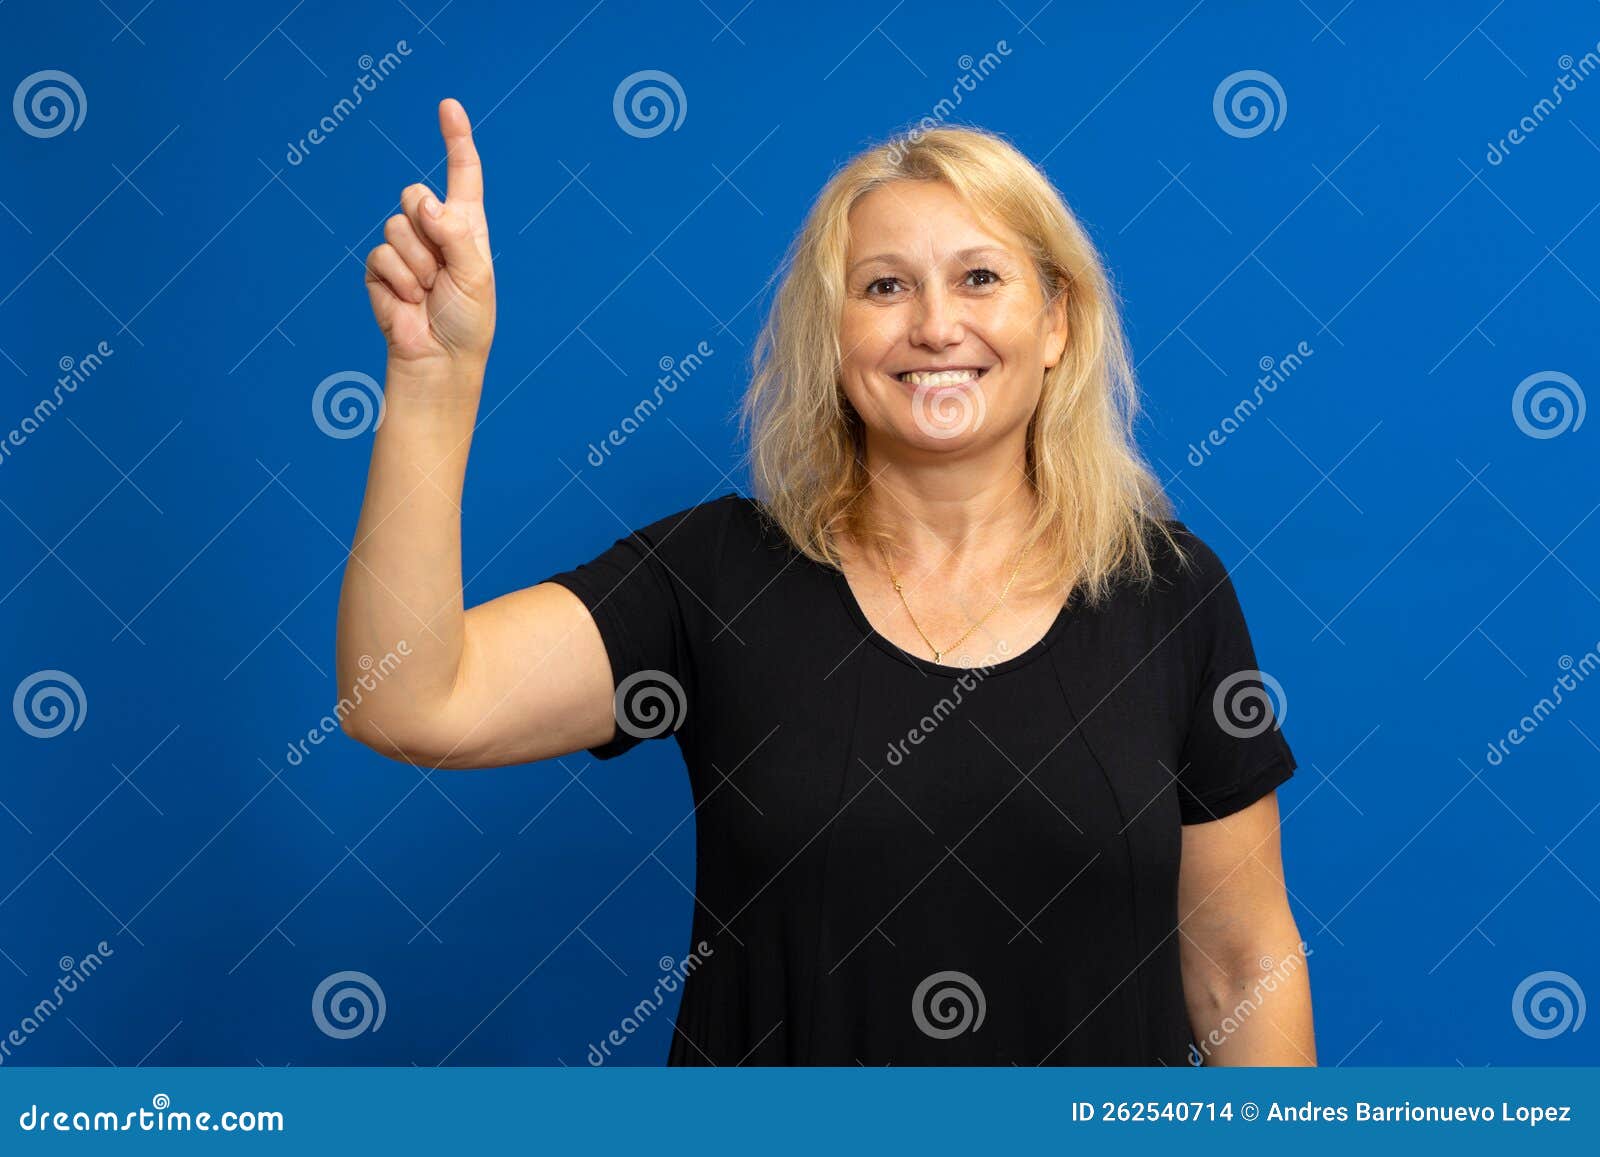 smart proactive 40 years old woman in black t-shirt holding up index finger with great new idea  on blue colored